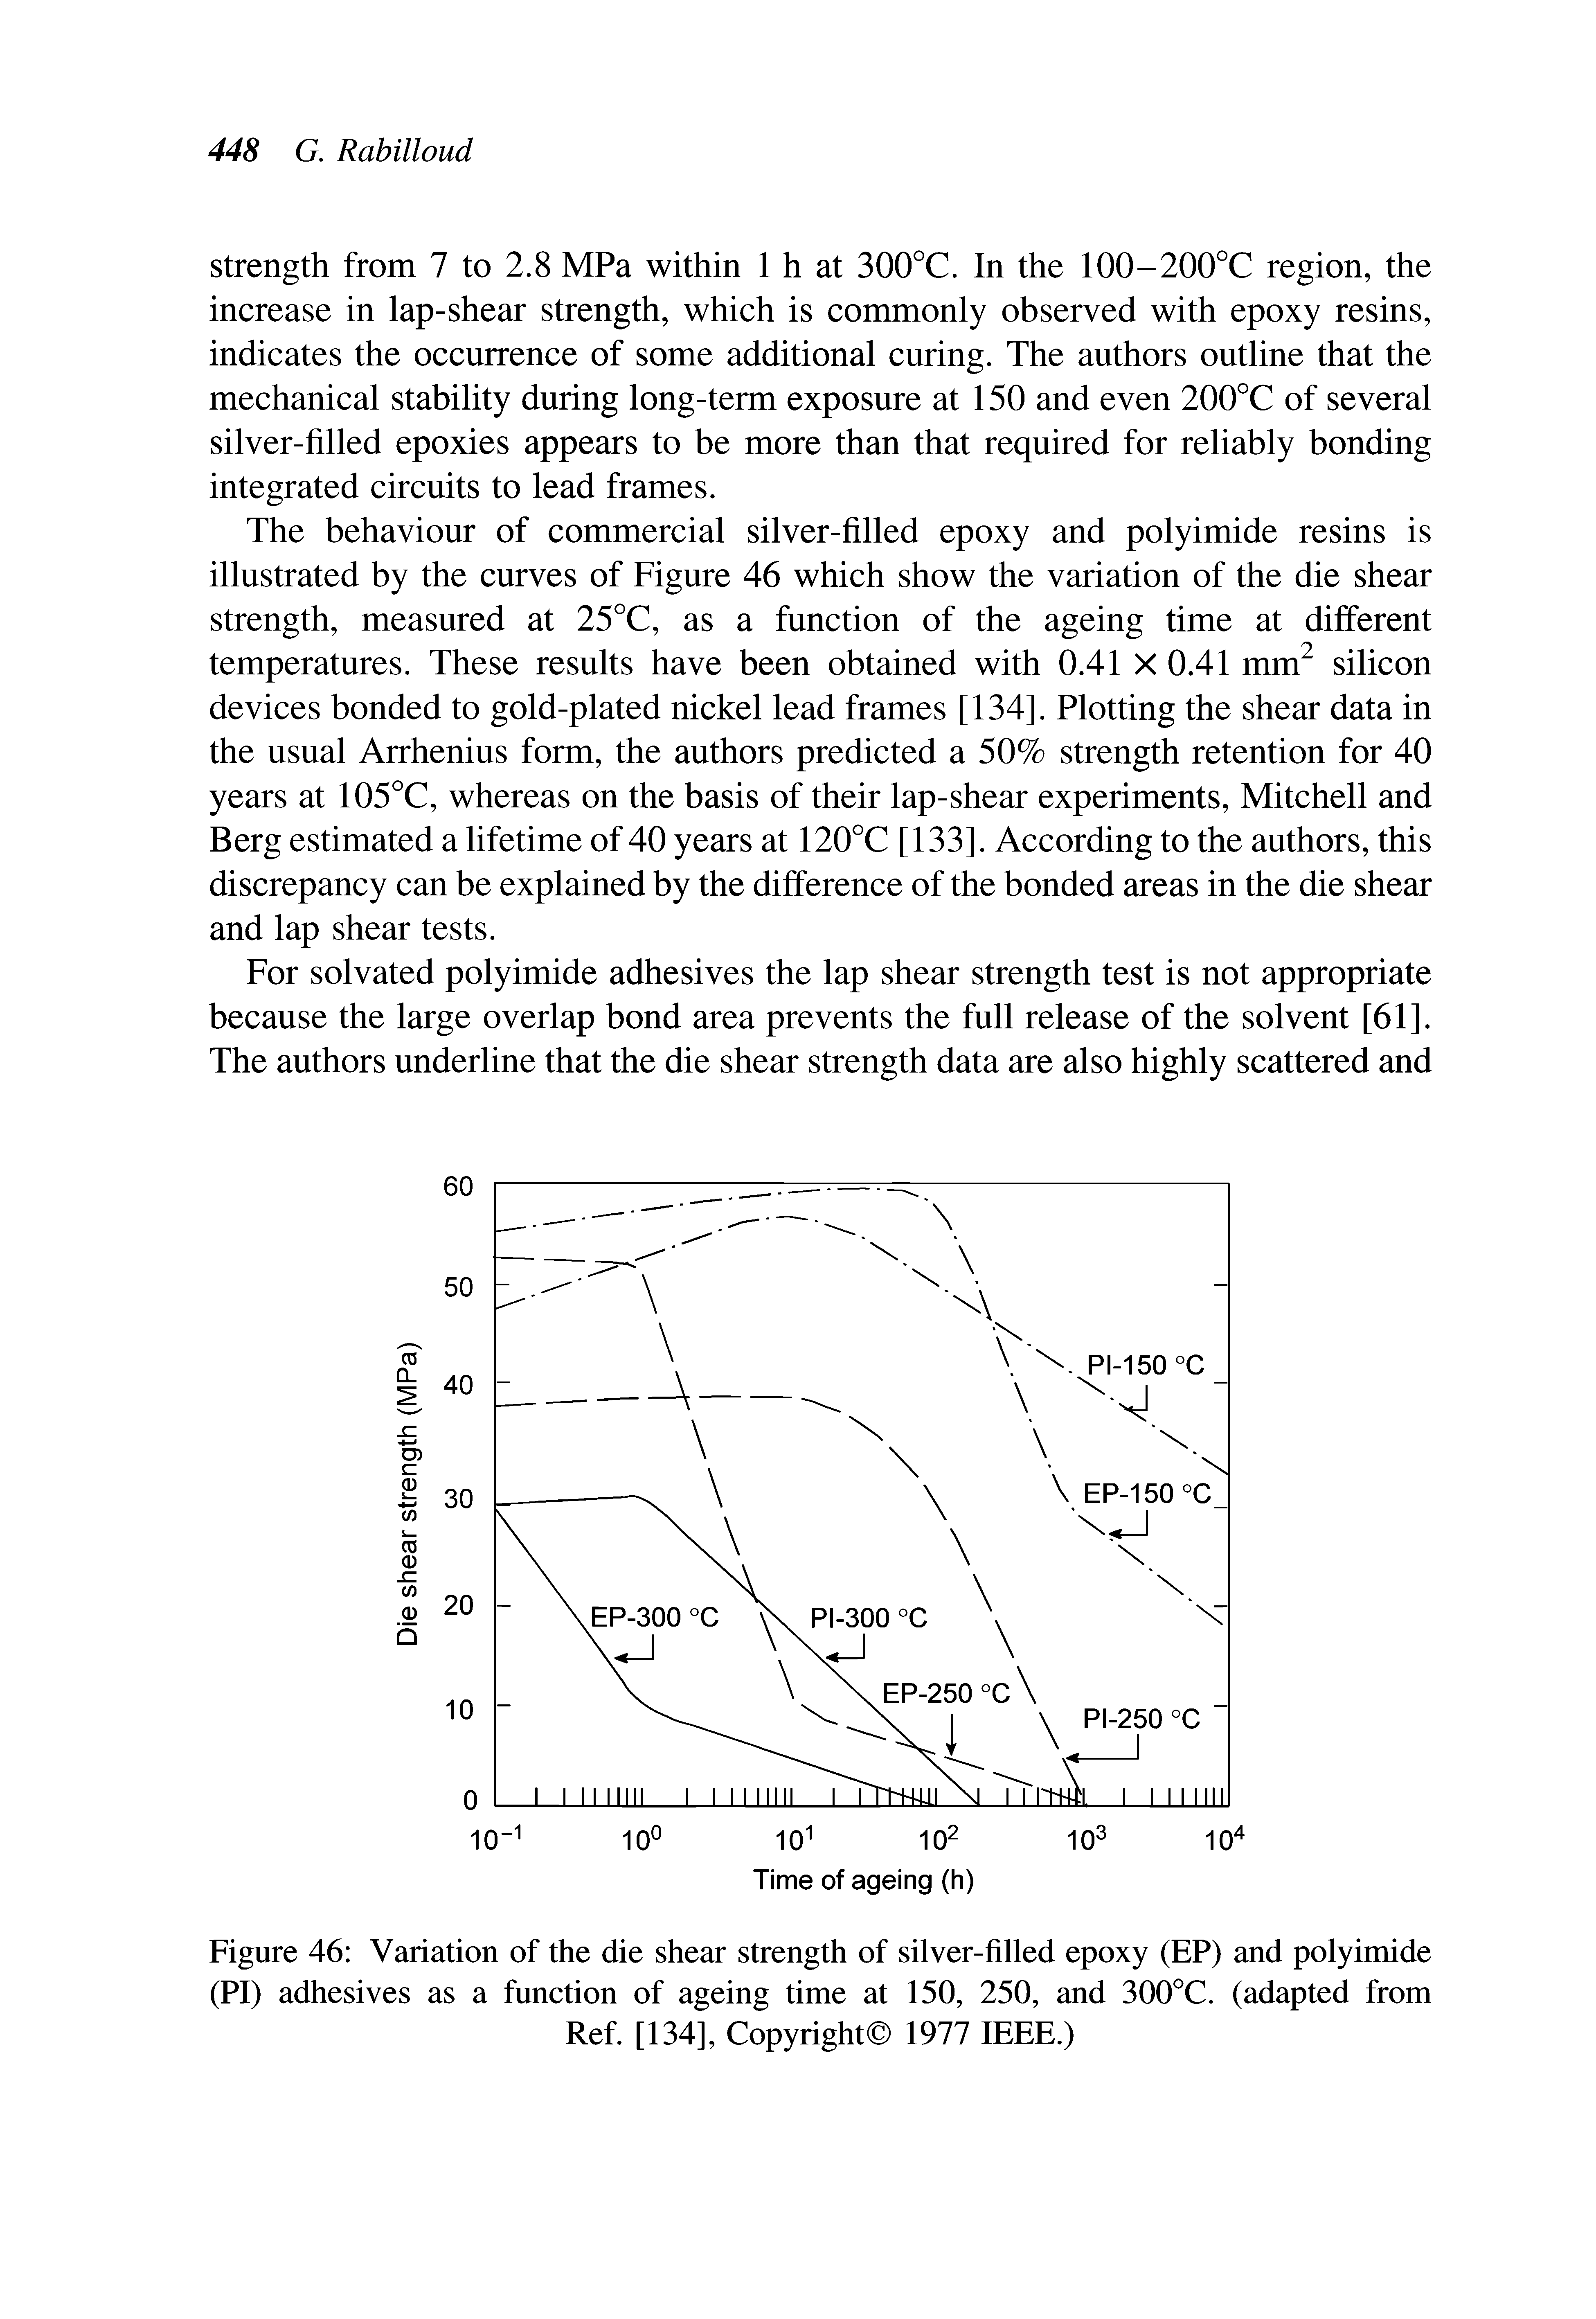 Figure 46 Variation of the die shear strength of silver-filled epoxy (EP) and polyimide (PI) adhesives as a function of ageing time at 150, 250, and 300°C. (adapted from Ref. [134], Copyright 1977 IEEE.)...